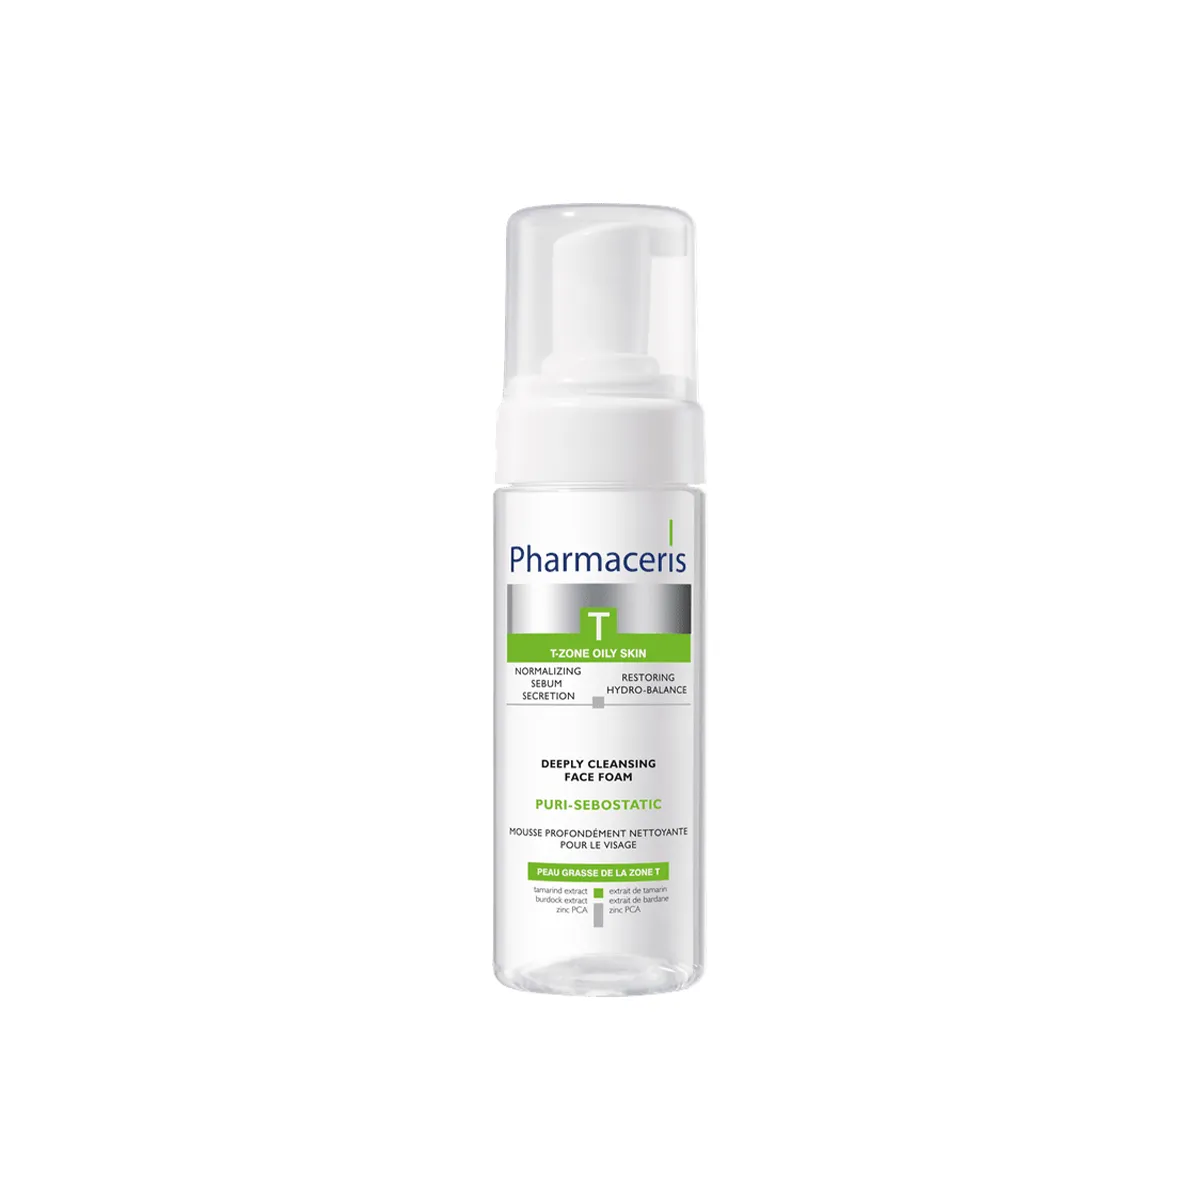 First product image of Pharmaceris Deeply Cleansing Face Foam 150ml